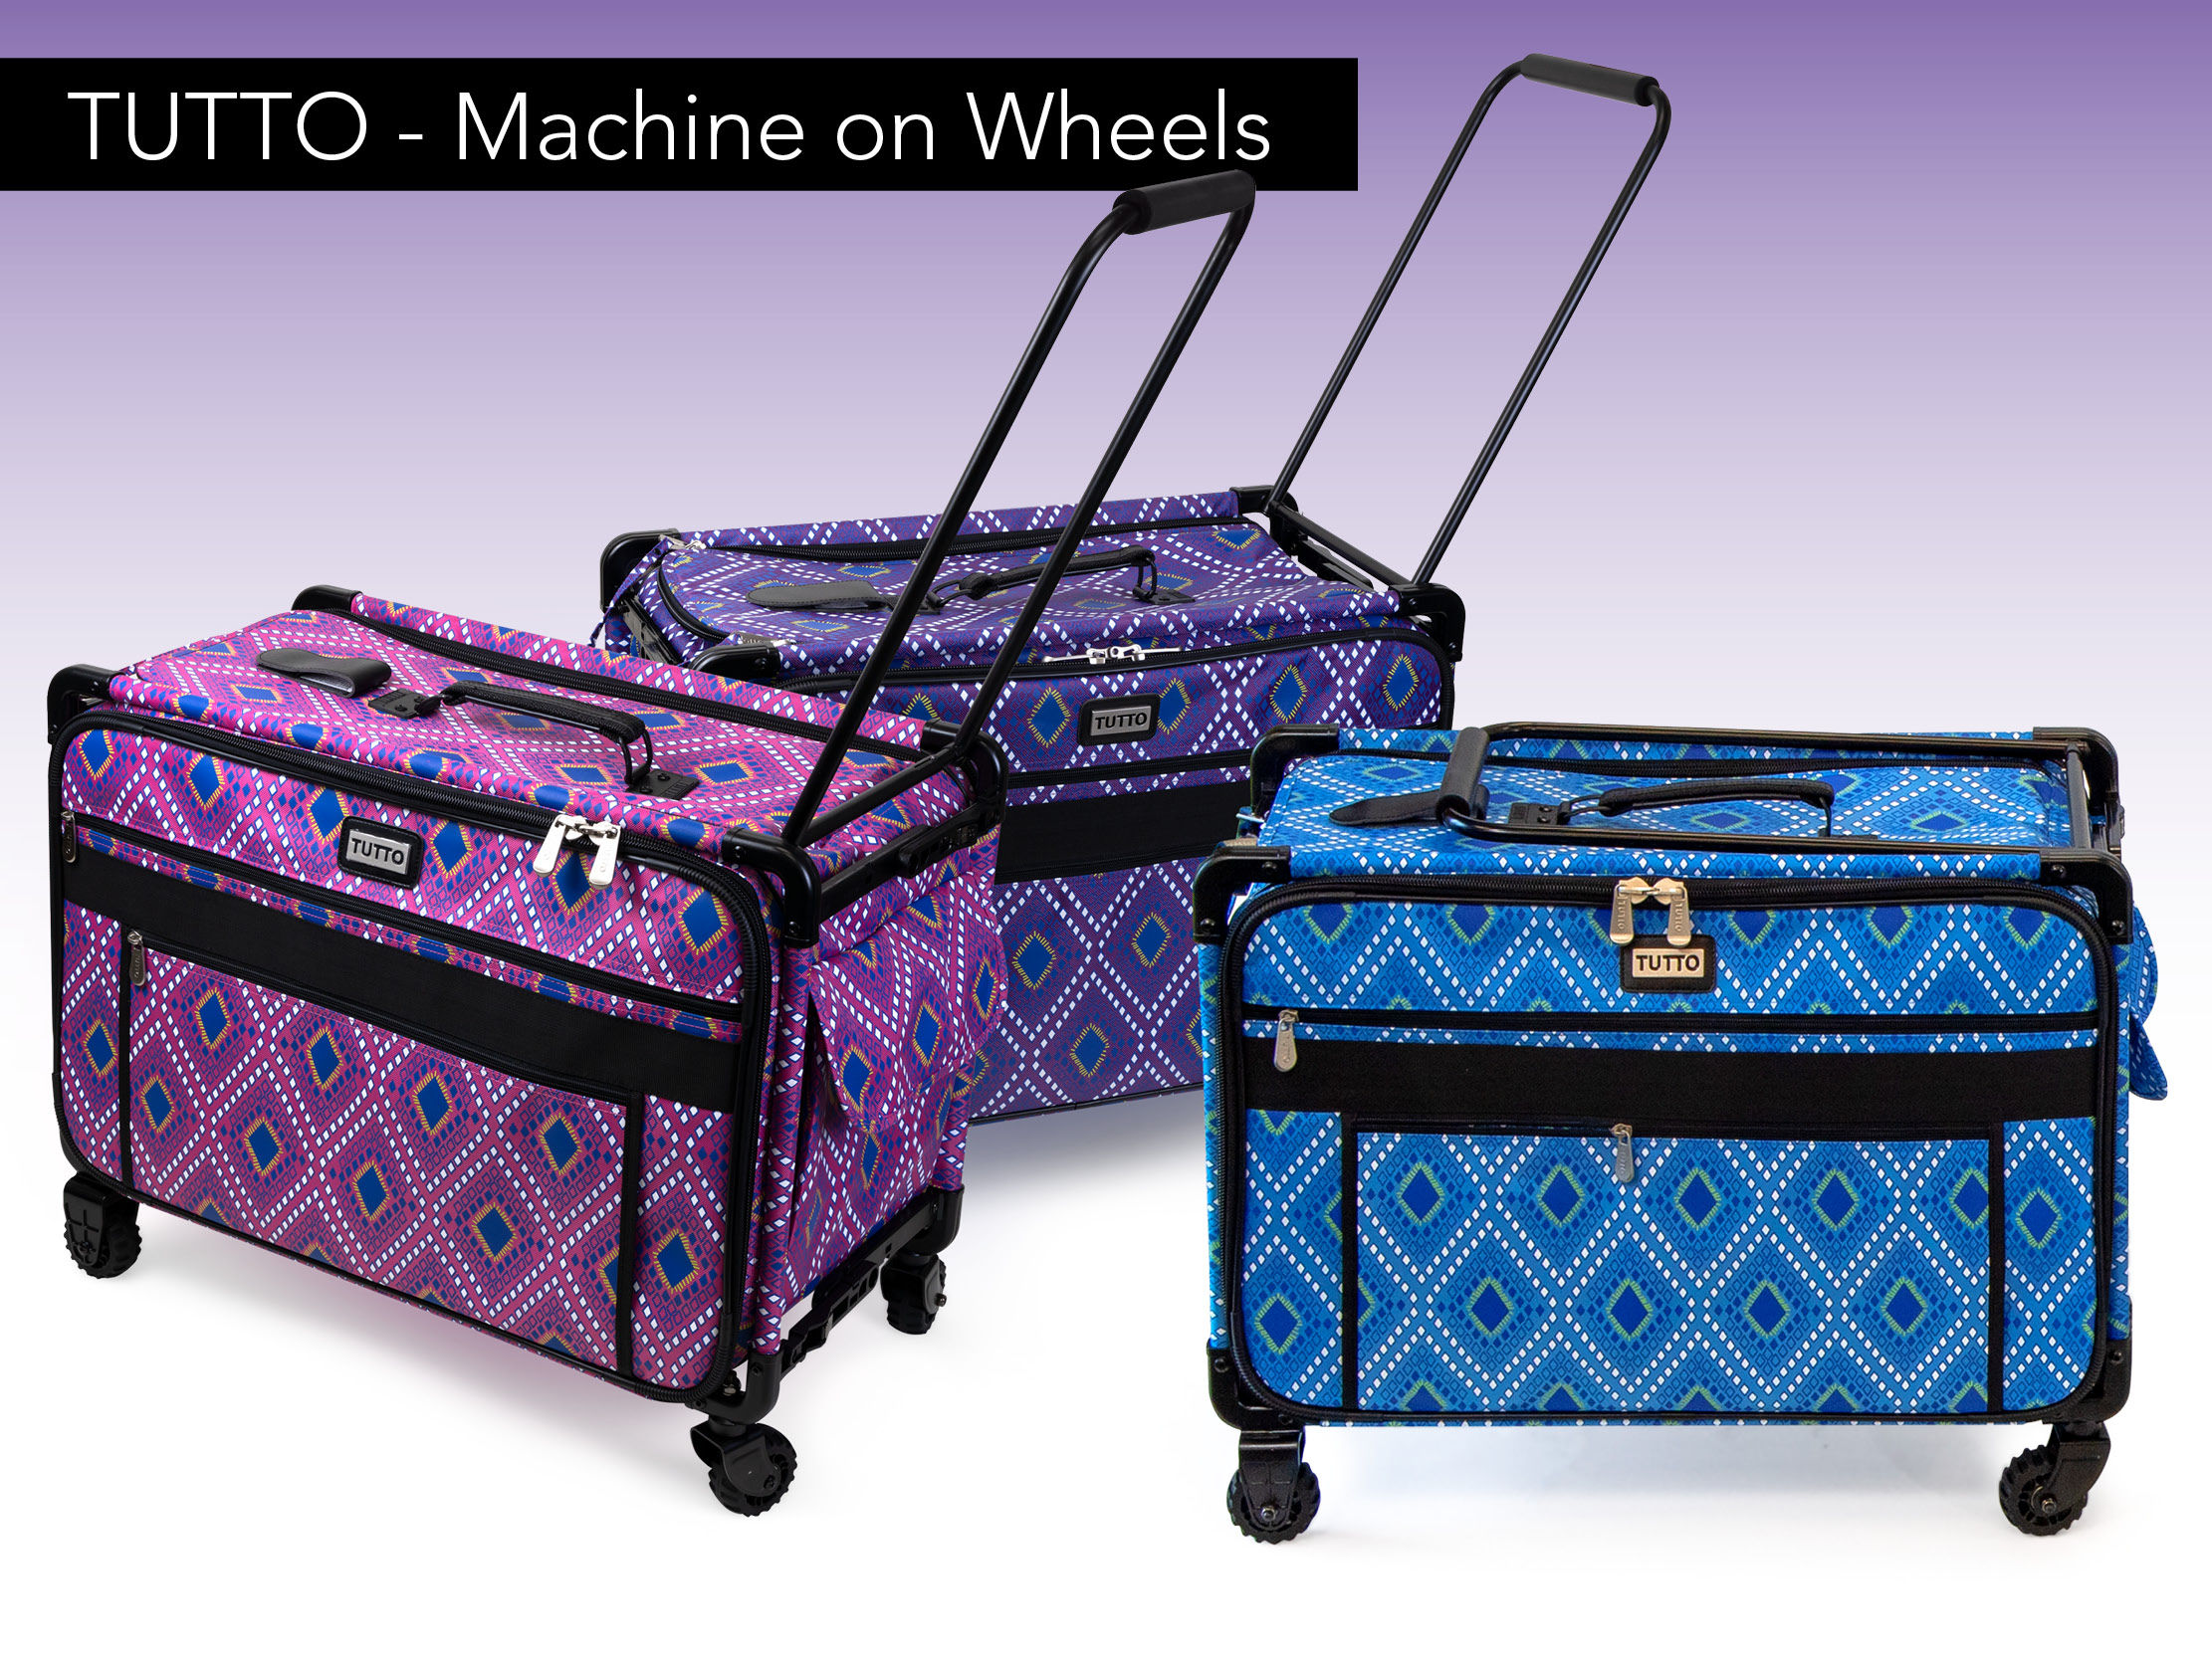 Tutto Extra Large Sewing Machine Bag On Wheels - Purple